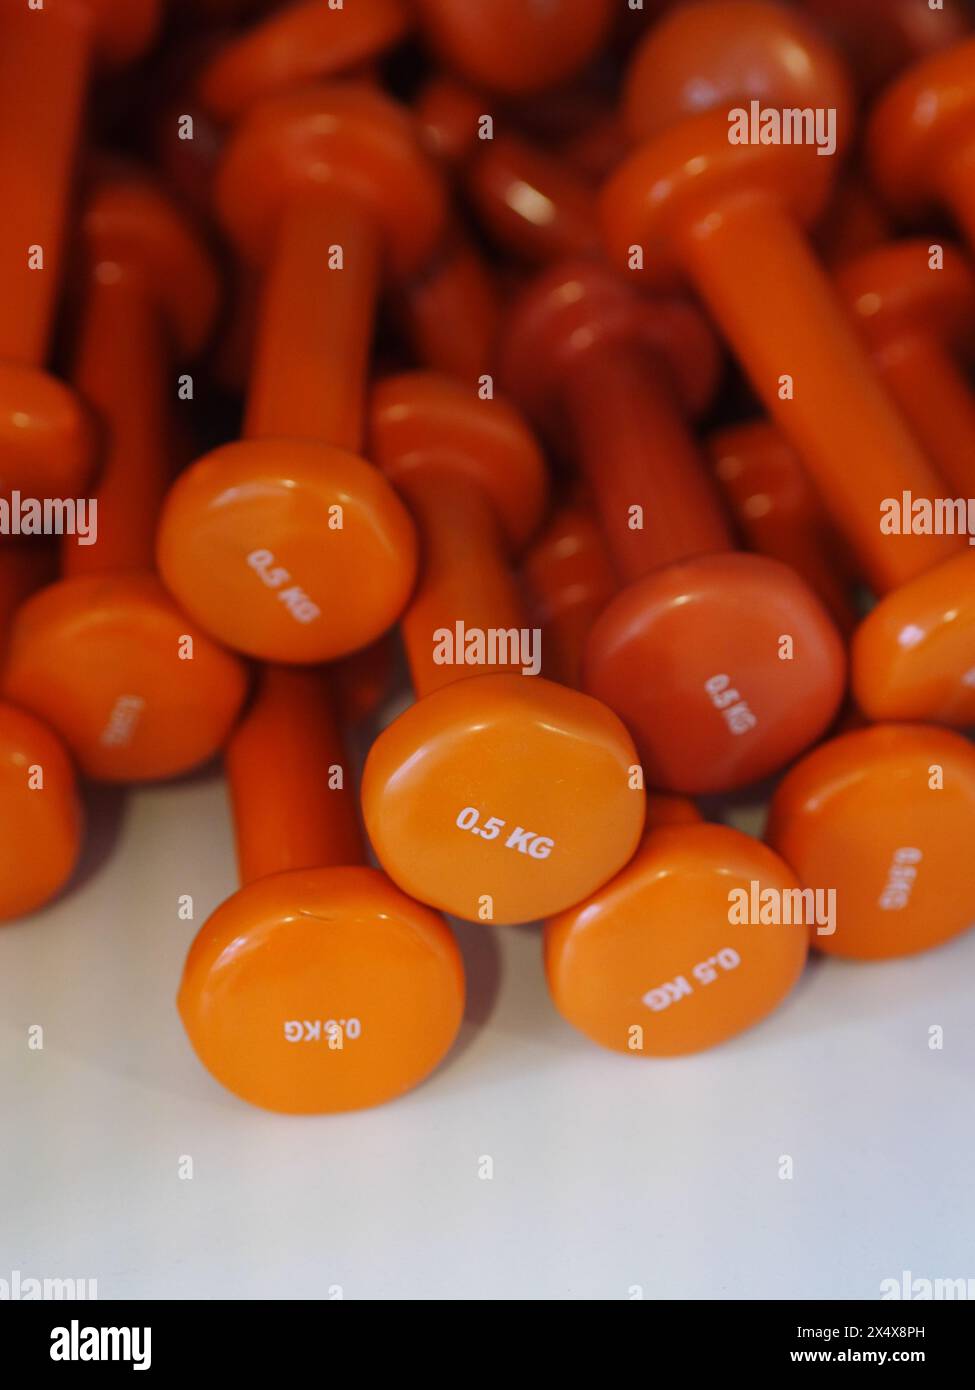 A stack of orange dumbbells with the numbers 0-5 kg on the top Stock Photo